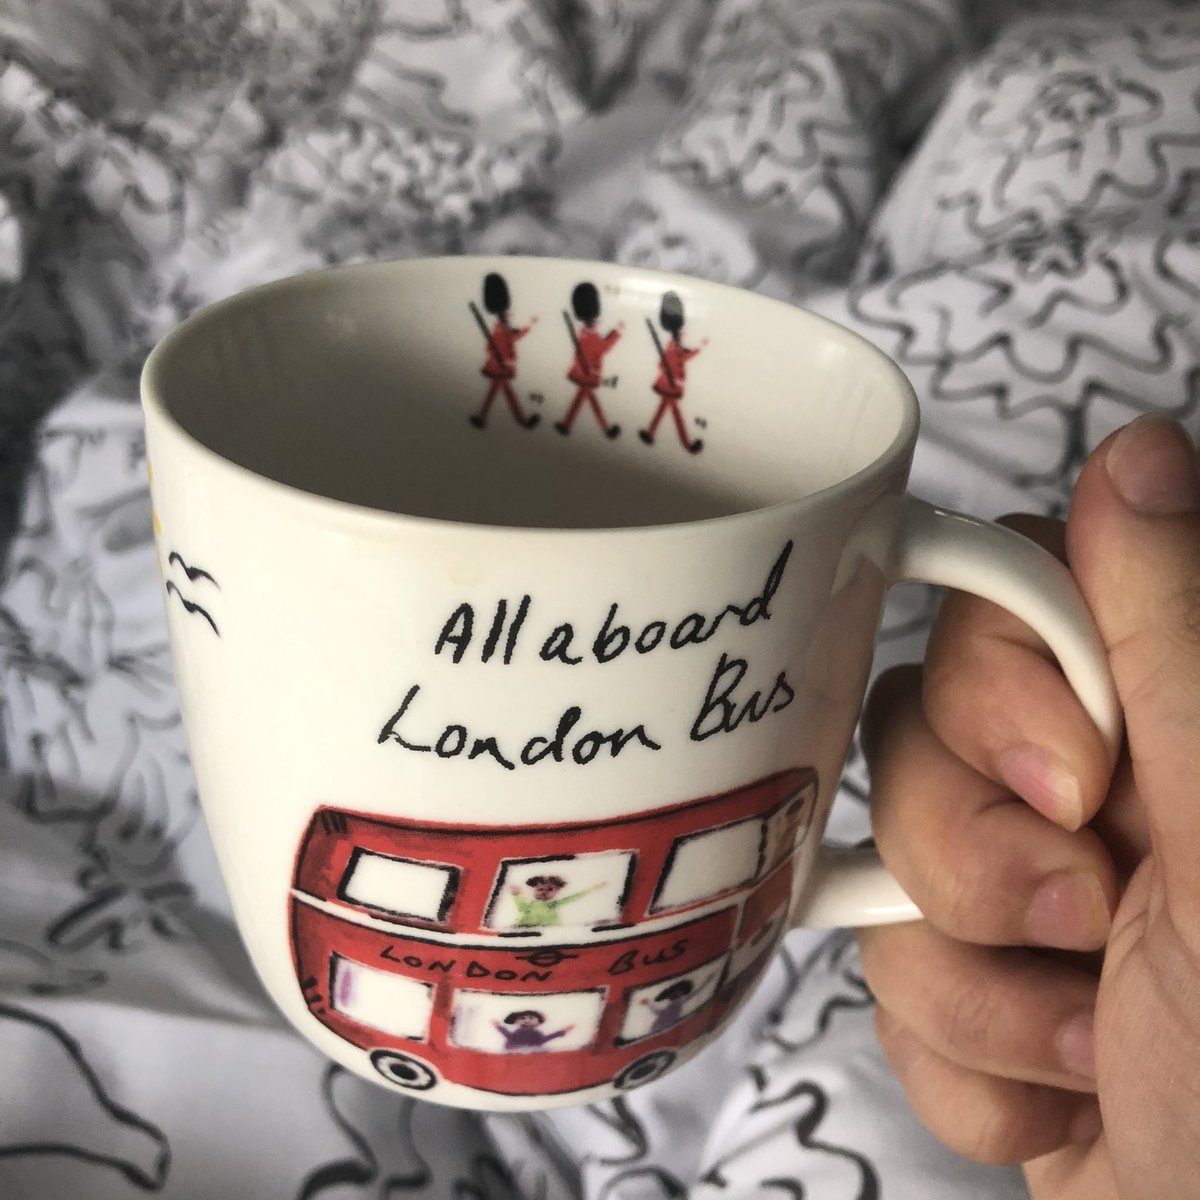 This cup is the last thing I have from my grandmother. It was a gift I had gotten for her when we took a trip to London one year. End of thread I guess. Kinda heavy for this morning, but thank you to everyone who was there for me. I love and appreciate it more than I can say.